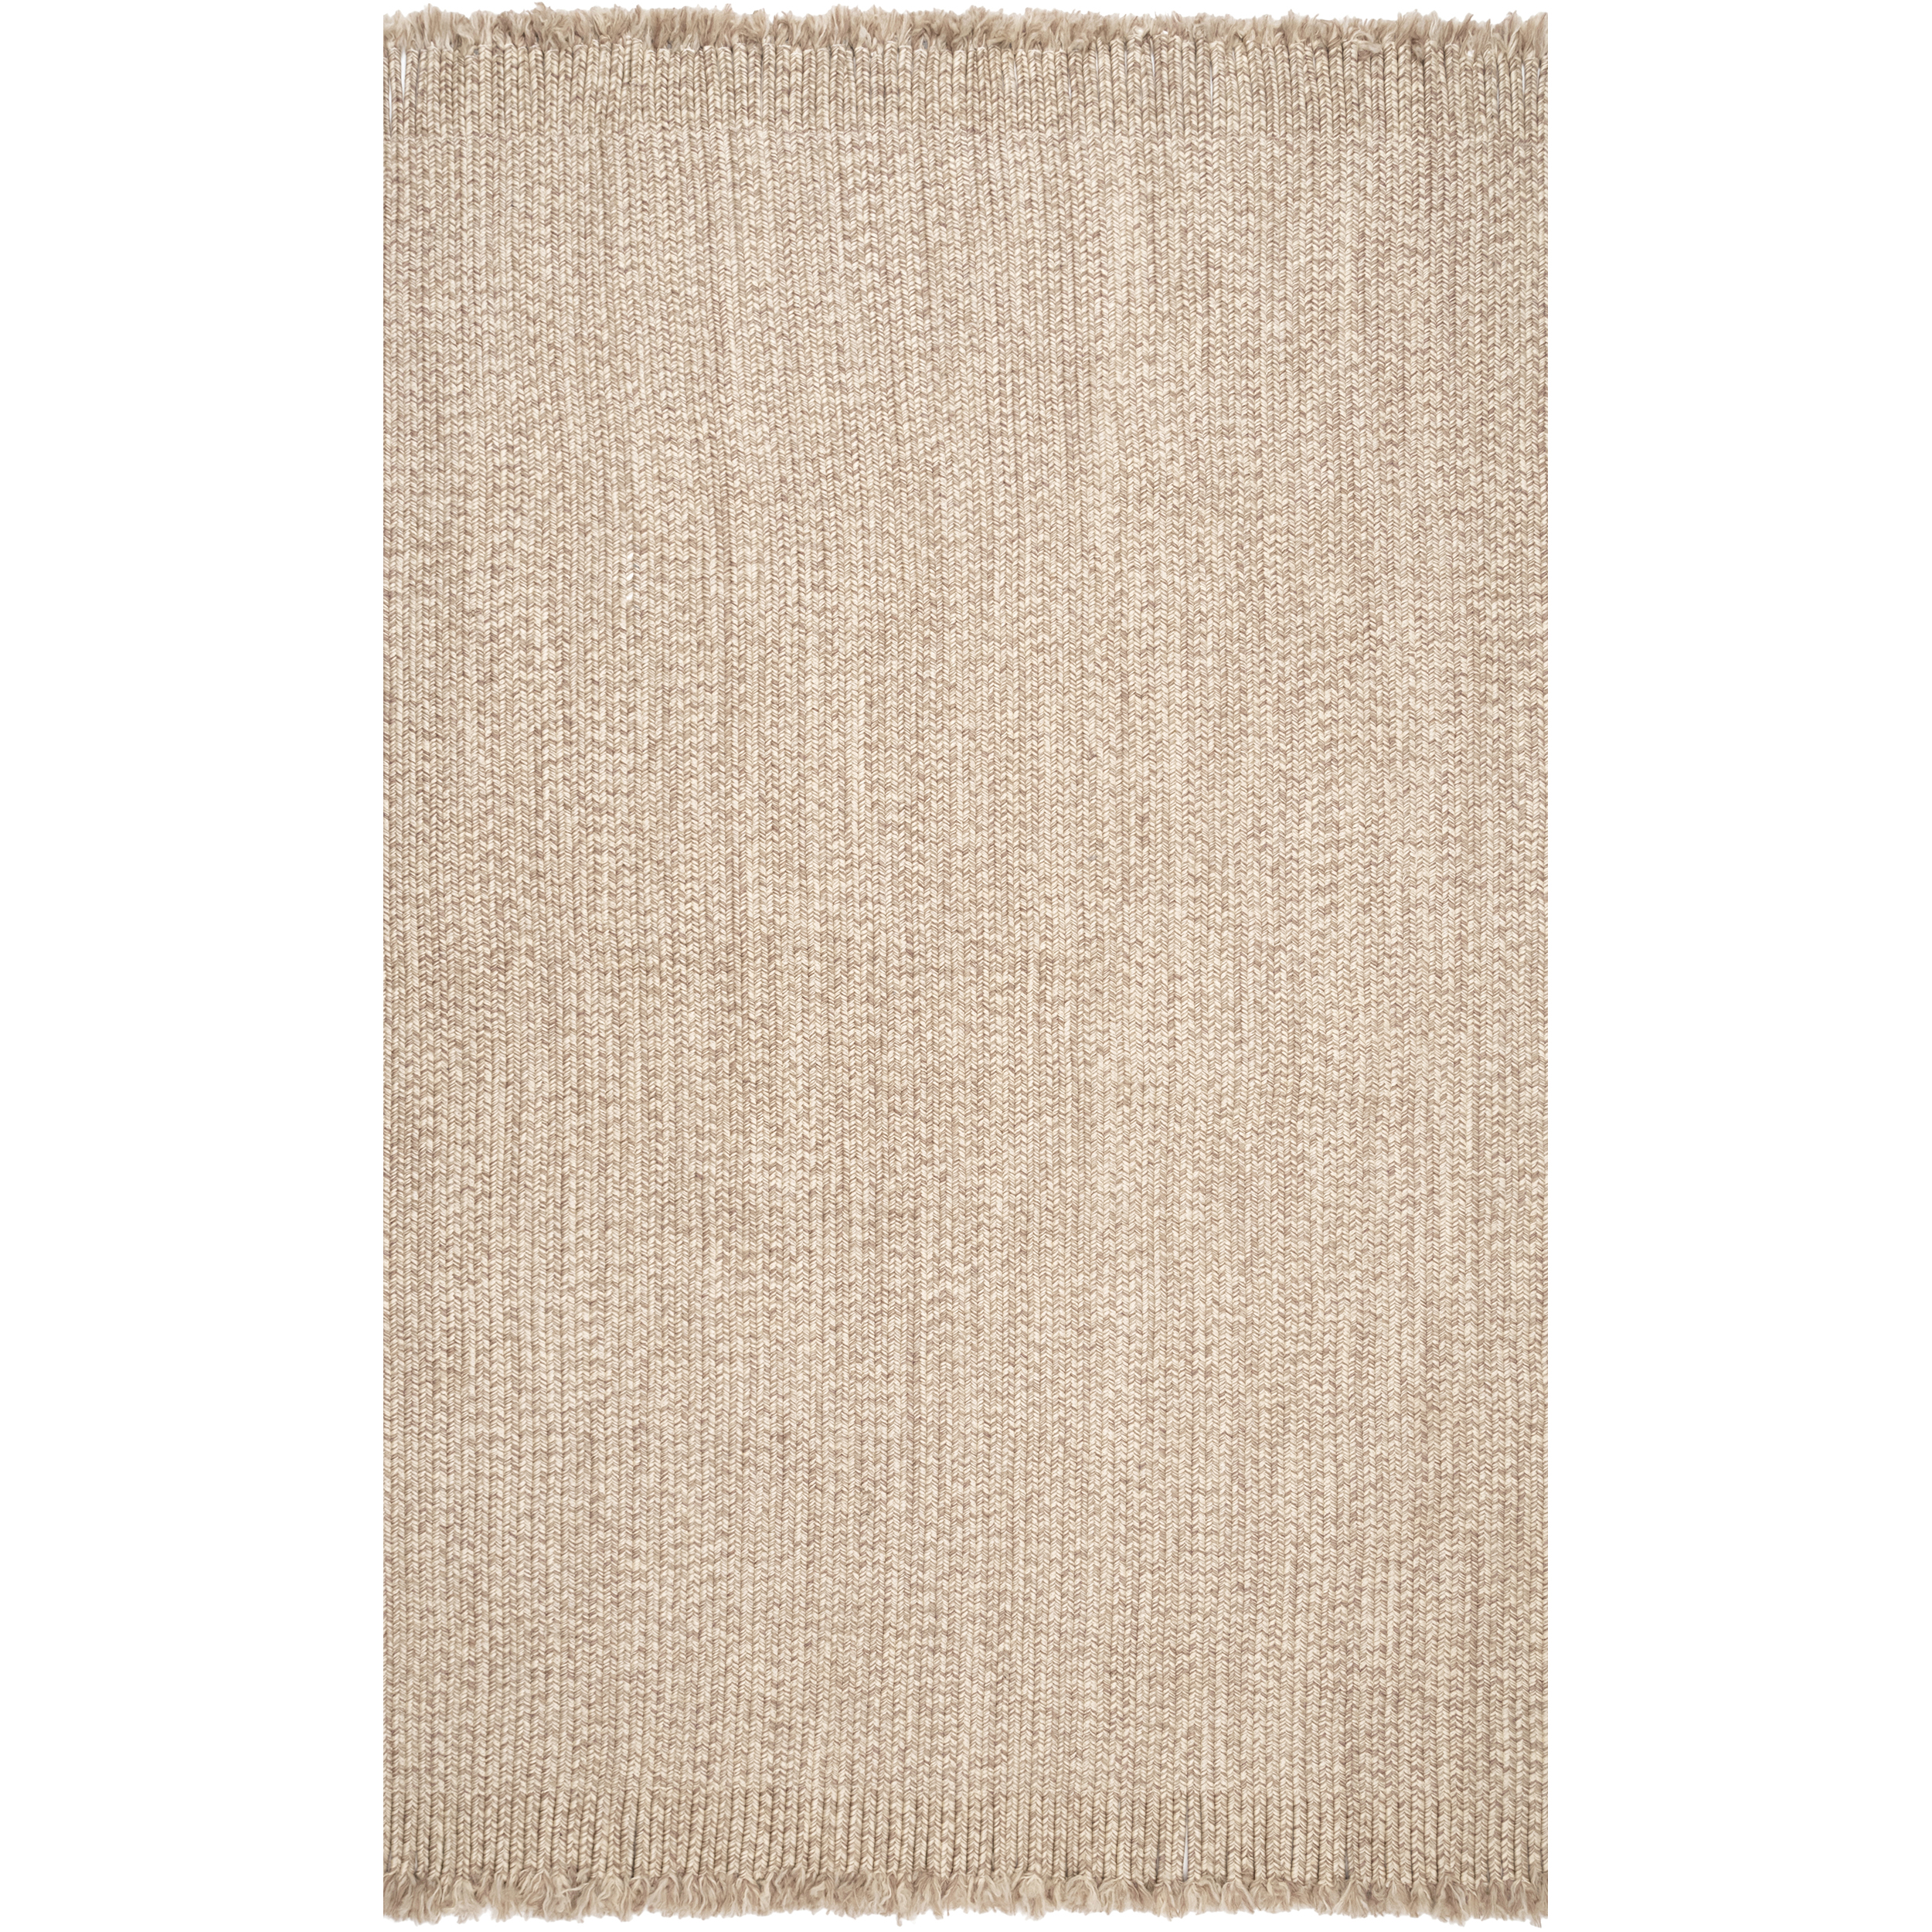 nuLOOM Courtney Braided Indoor/Outdoor Area Rug, 8' 6" x 11' 6", Tan - image 1 of 2